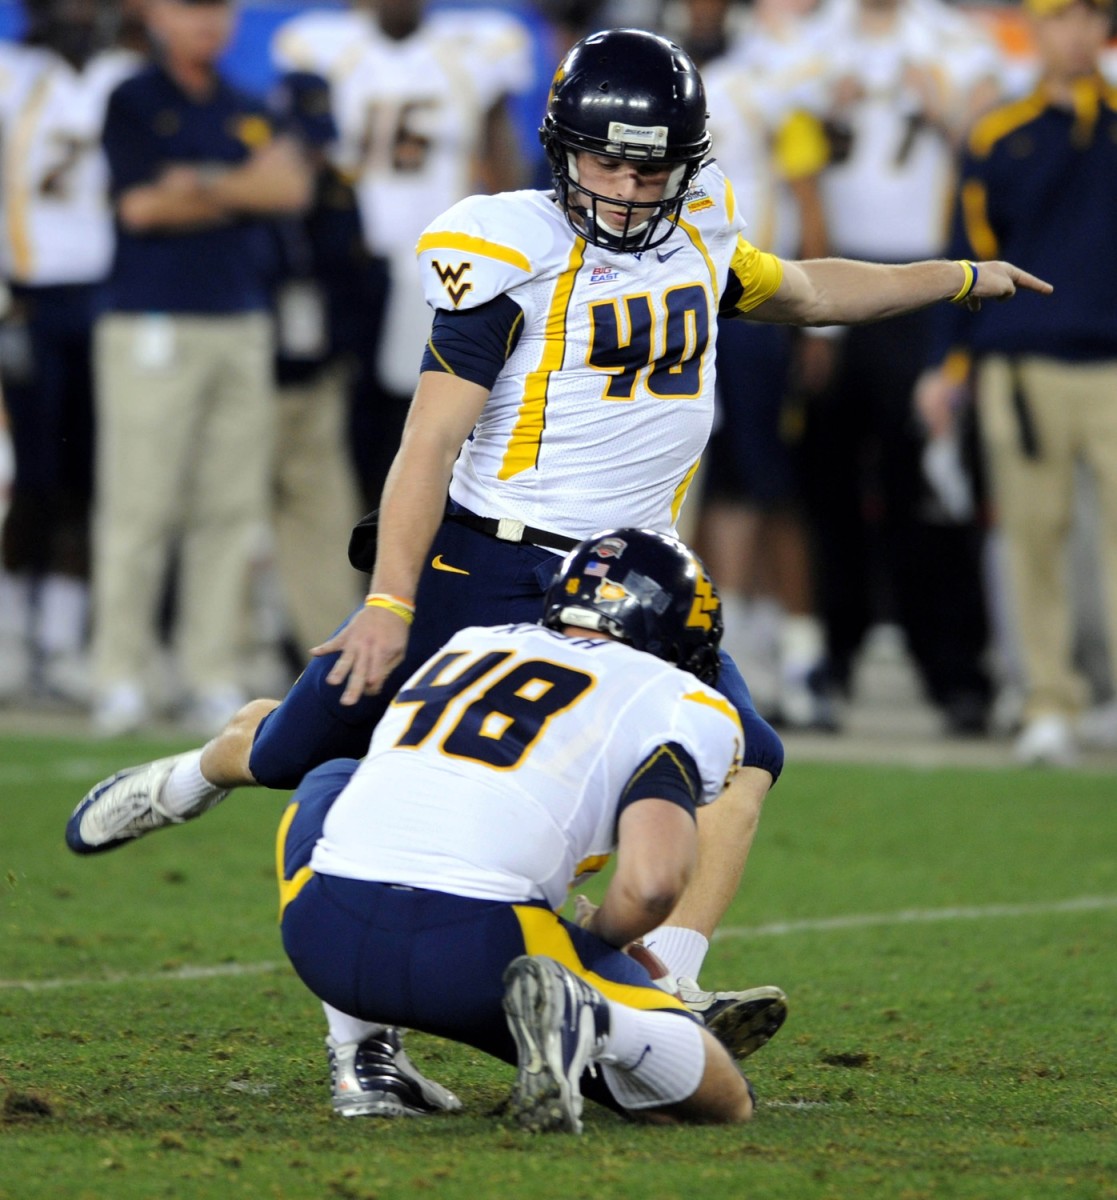 Jan 2, 2008; Glendale, AZ; USA; West Virginia Mountaineers kicker Pat McAfee (40) attempts a field goal out of the hold of Jeremy Kash (48) in the first half against the Oklahoma Sooners in the Fiesta Bowl at University of Phoenix Stadium.